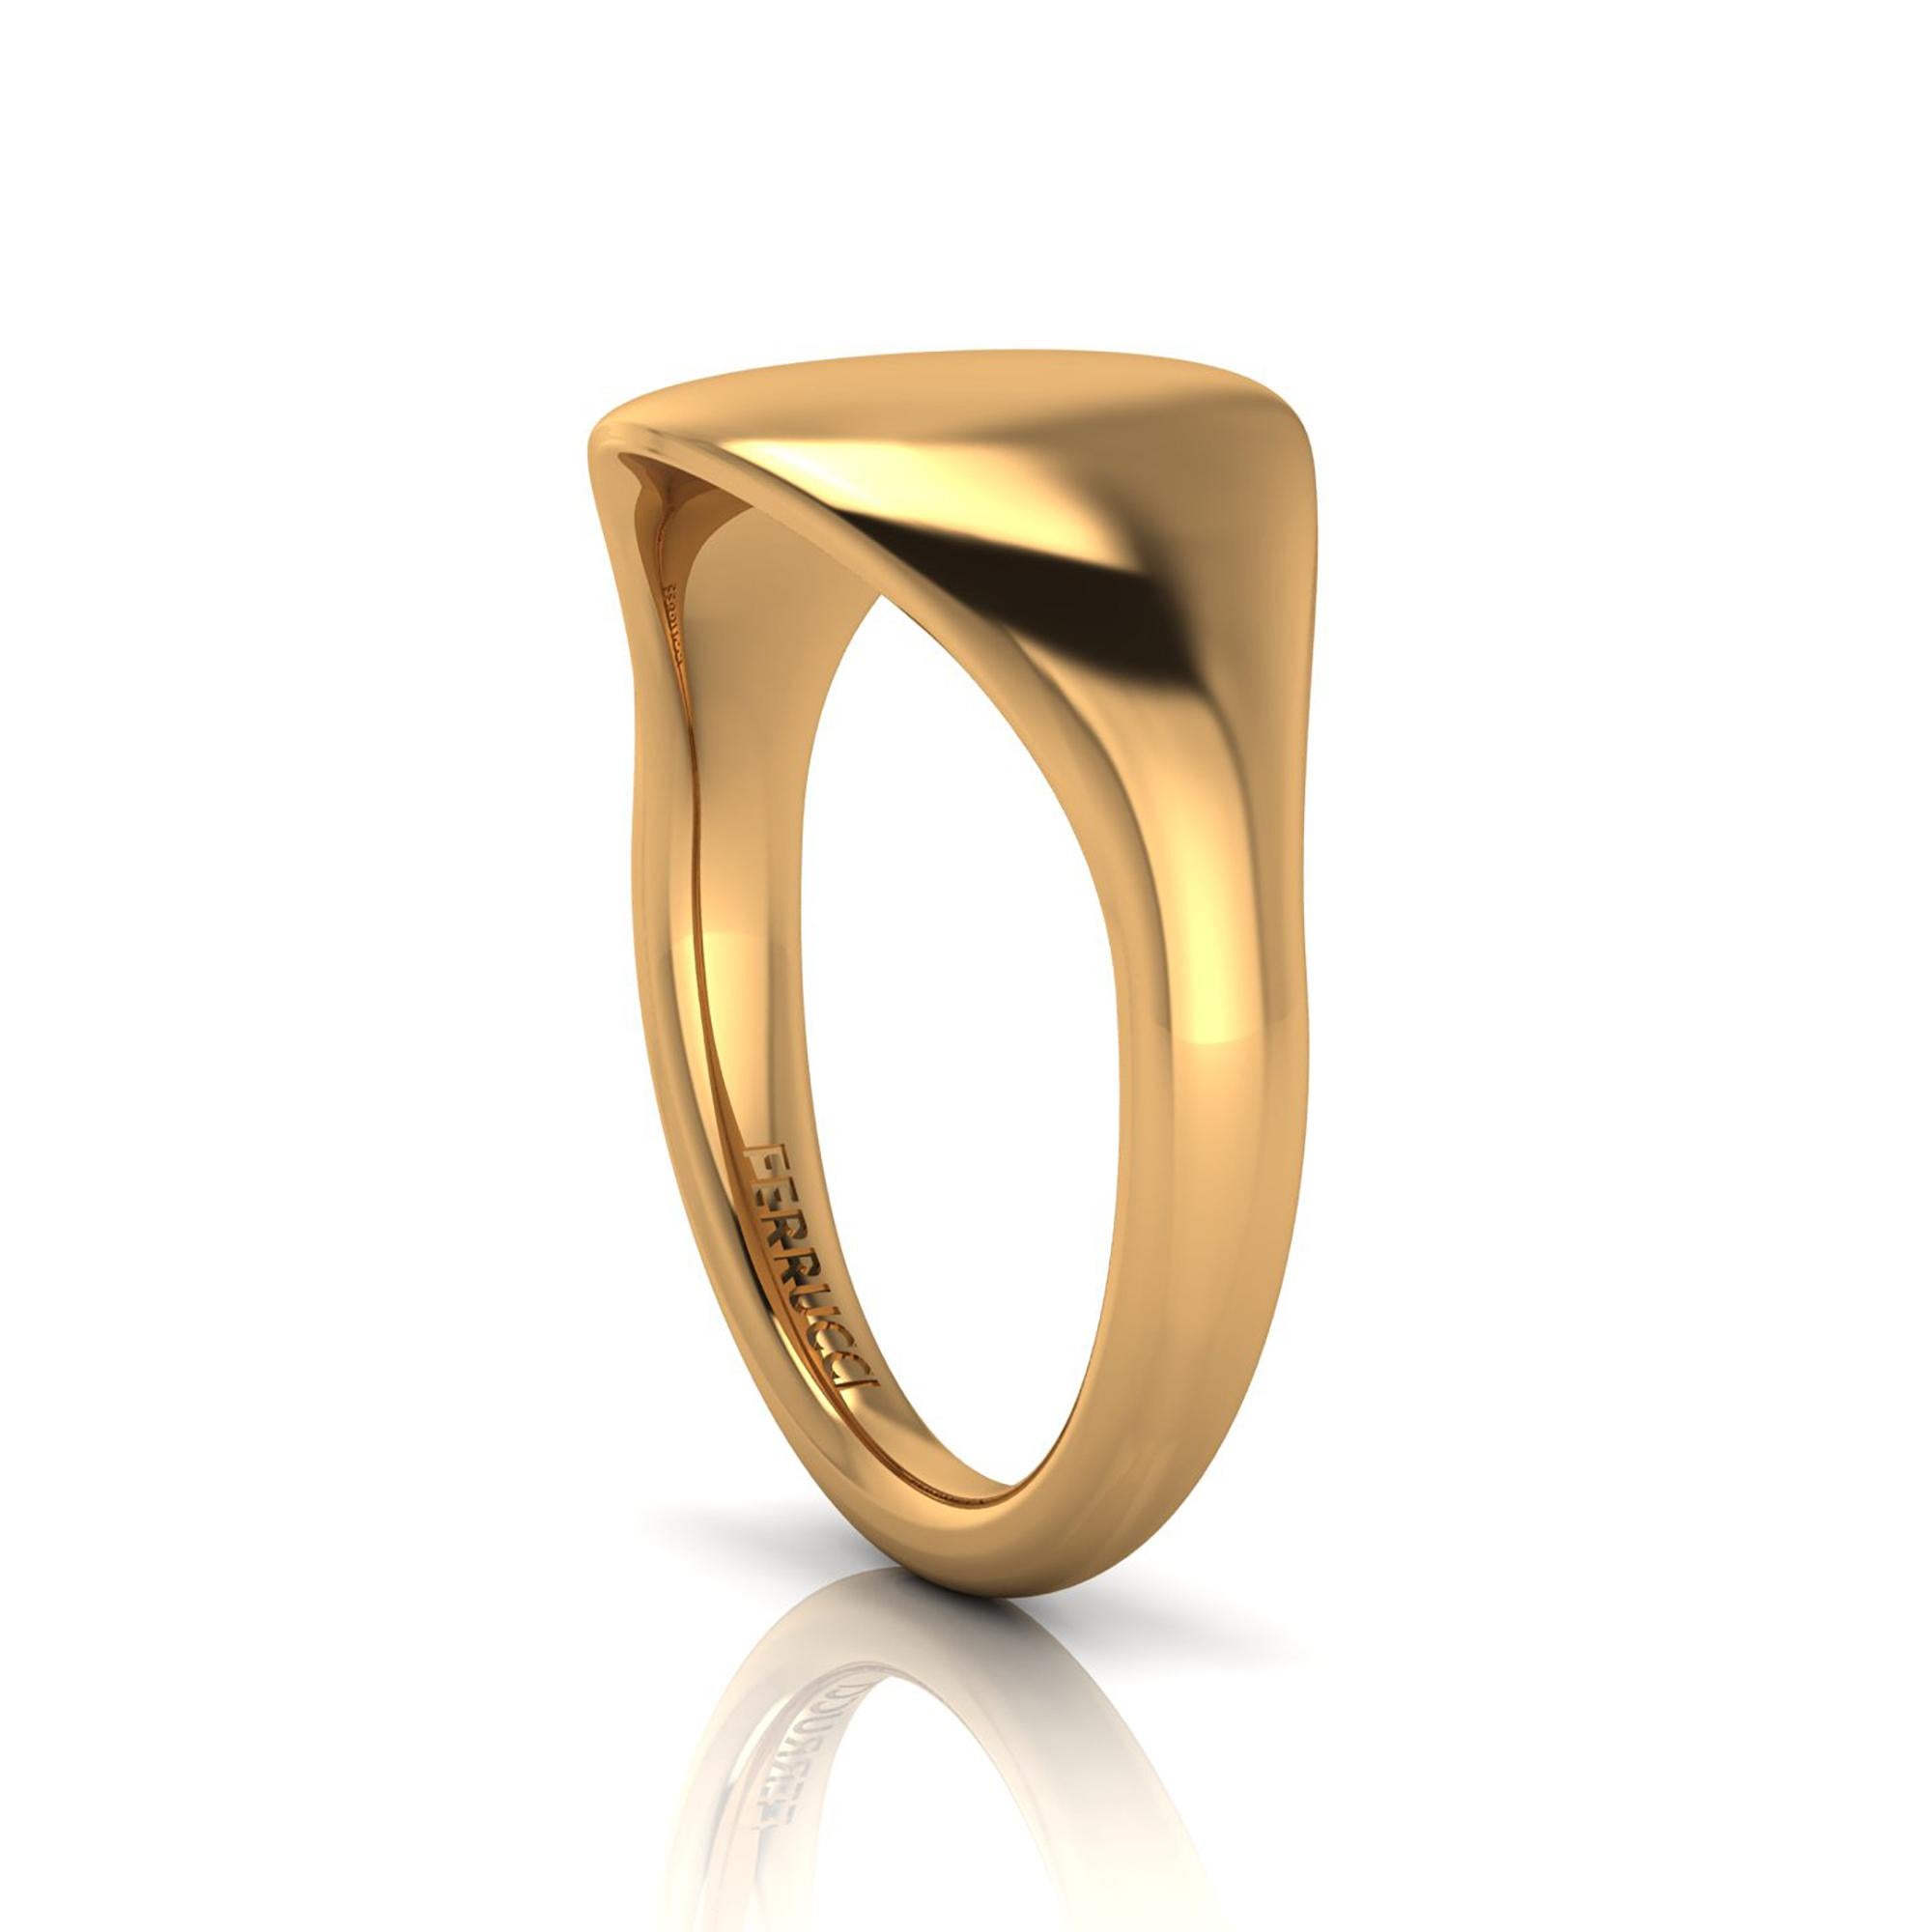 Solid 18k gold curved, organic ring, round profile for maximum comfort fit, bold and modern design

Size 8, complimentary sizing upon order before shipping.